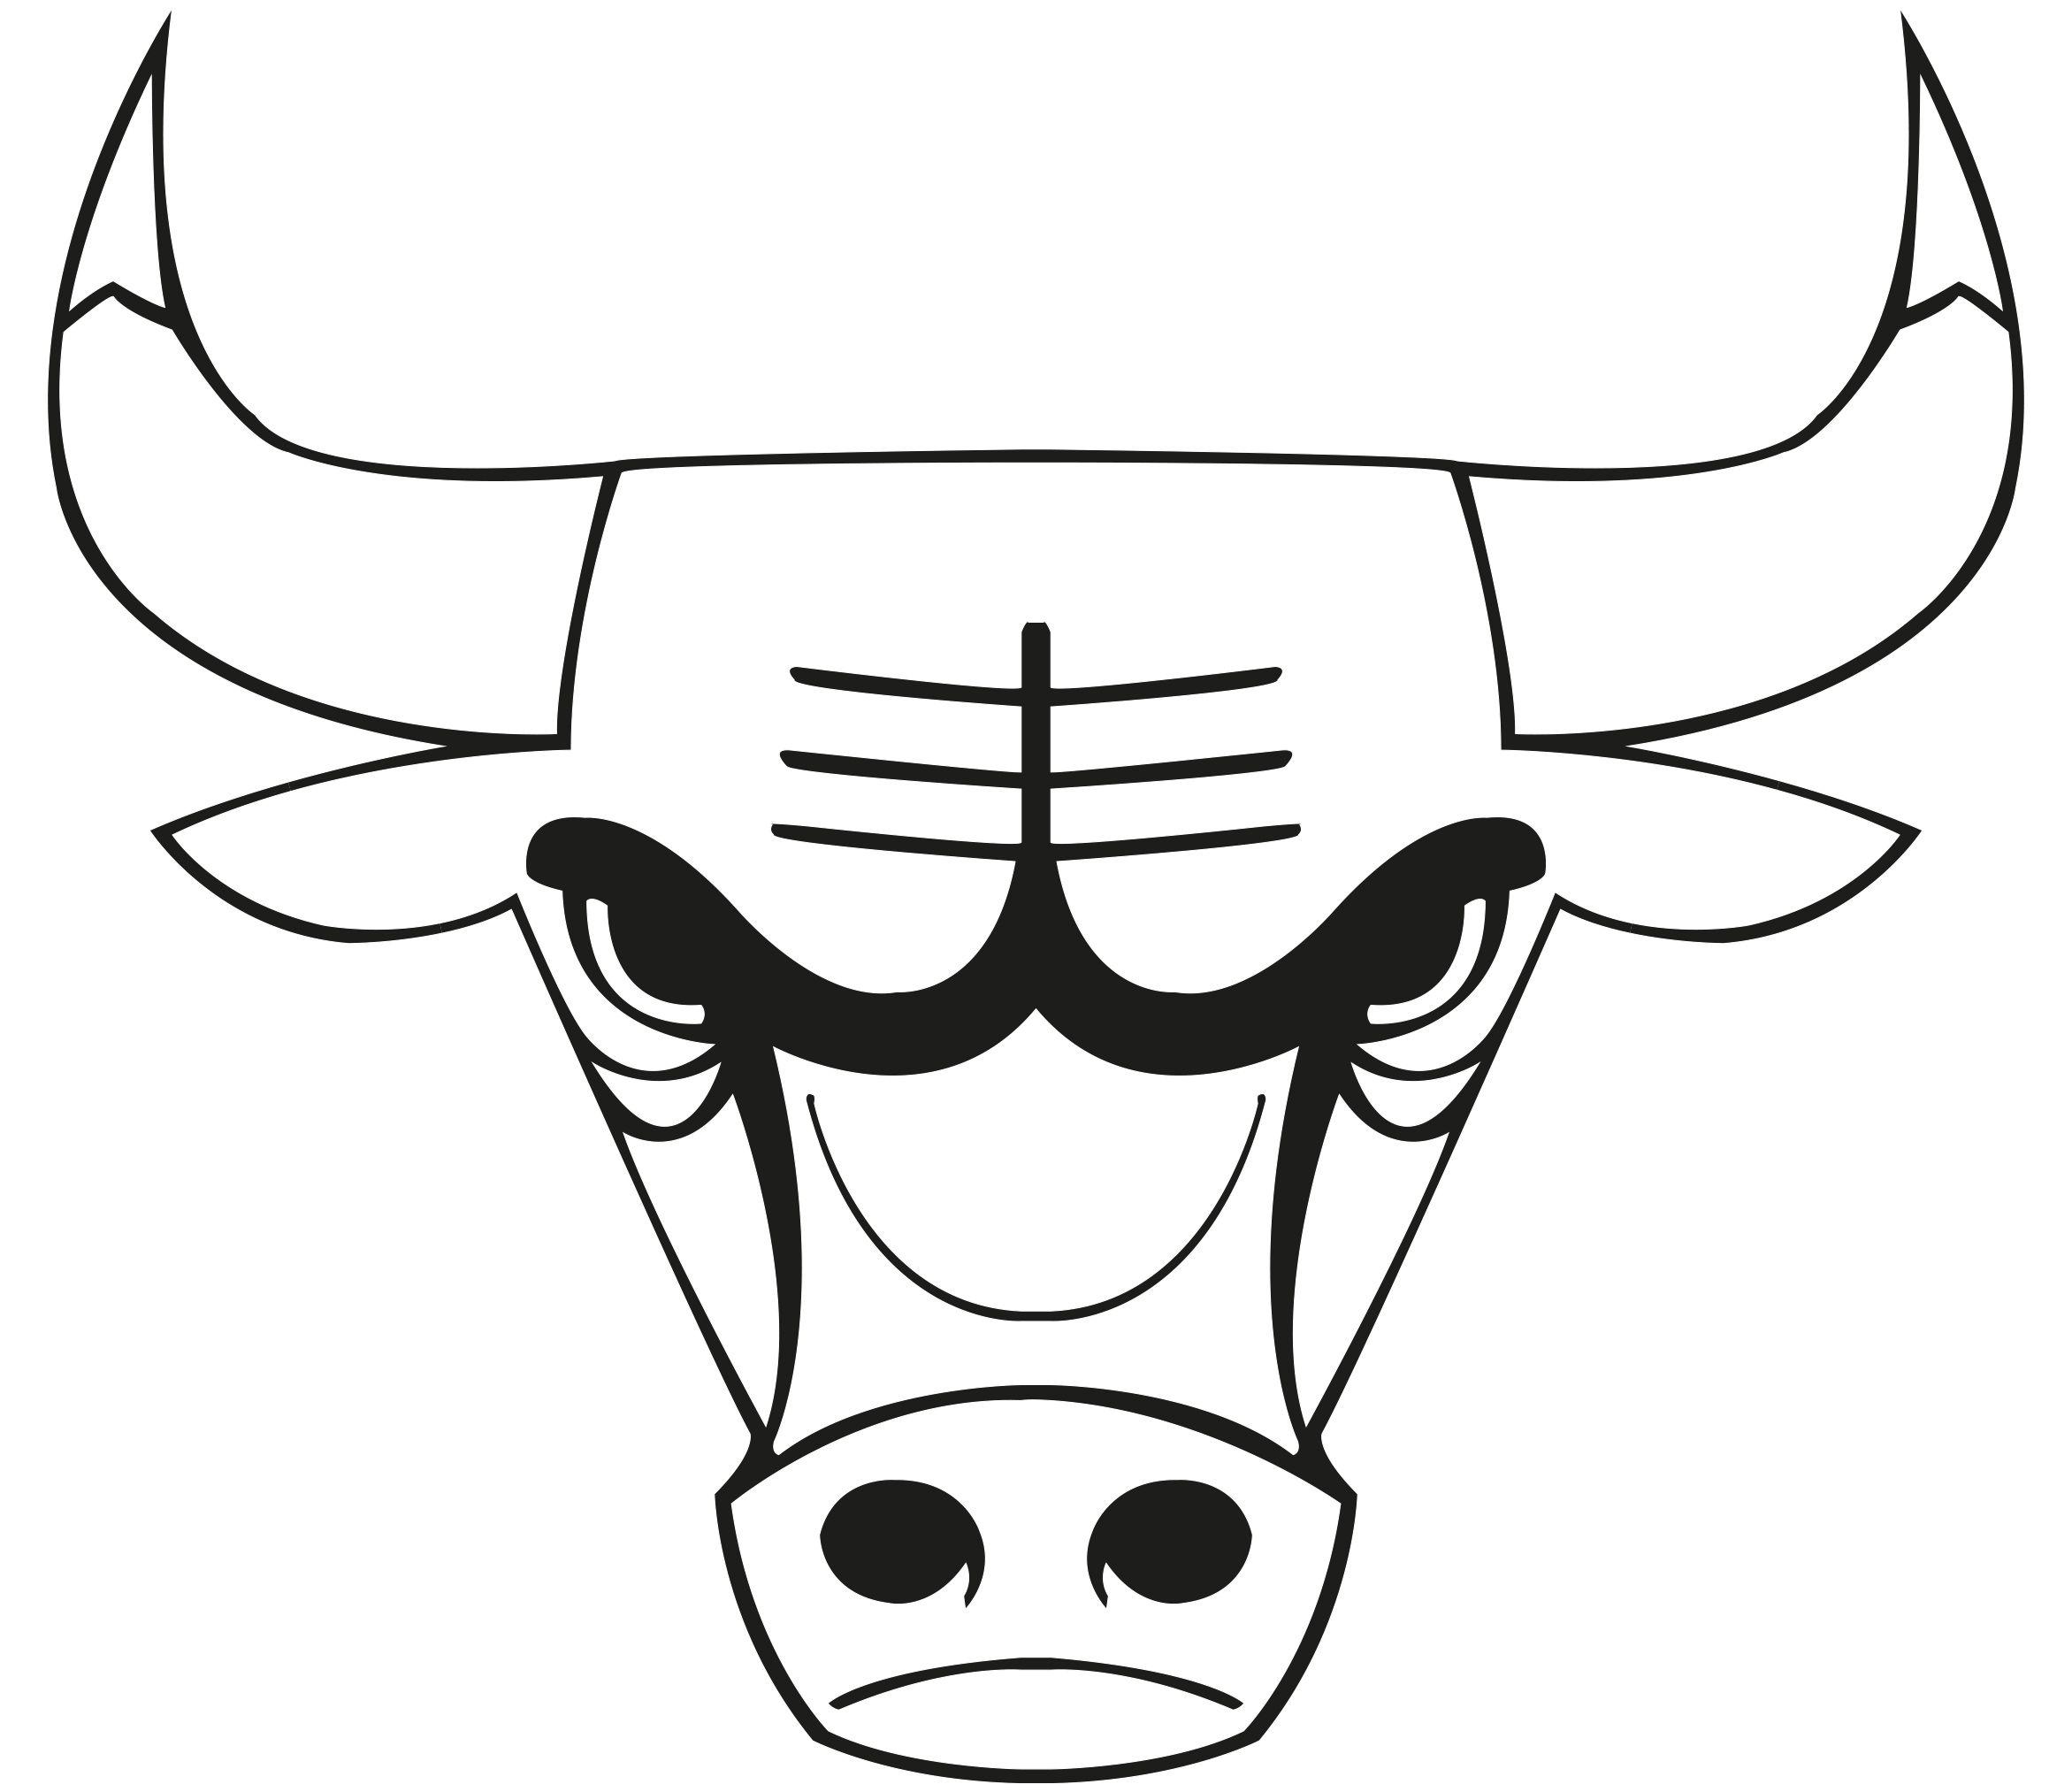 White Bull Logo - images of the chicago bulls logo | chicago bulls colouring pages ...